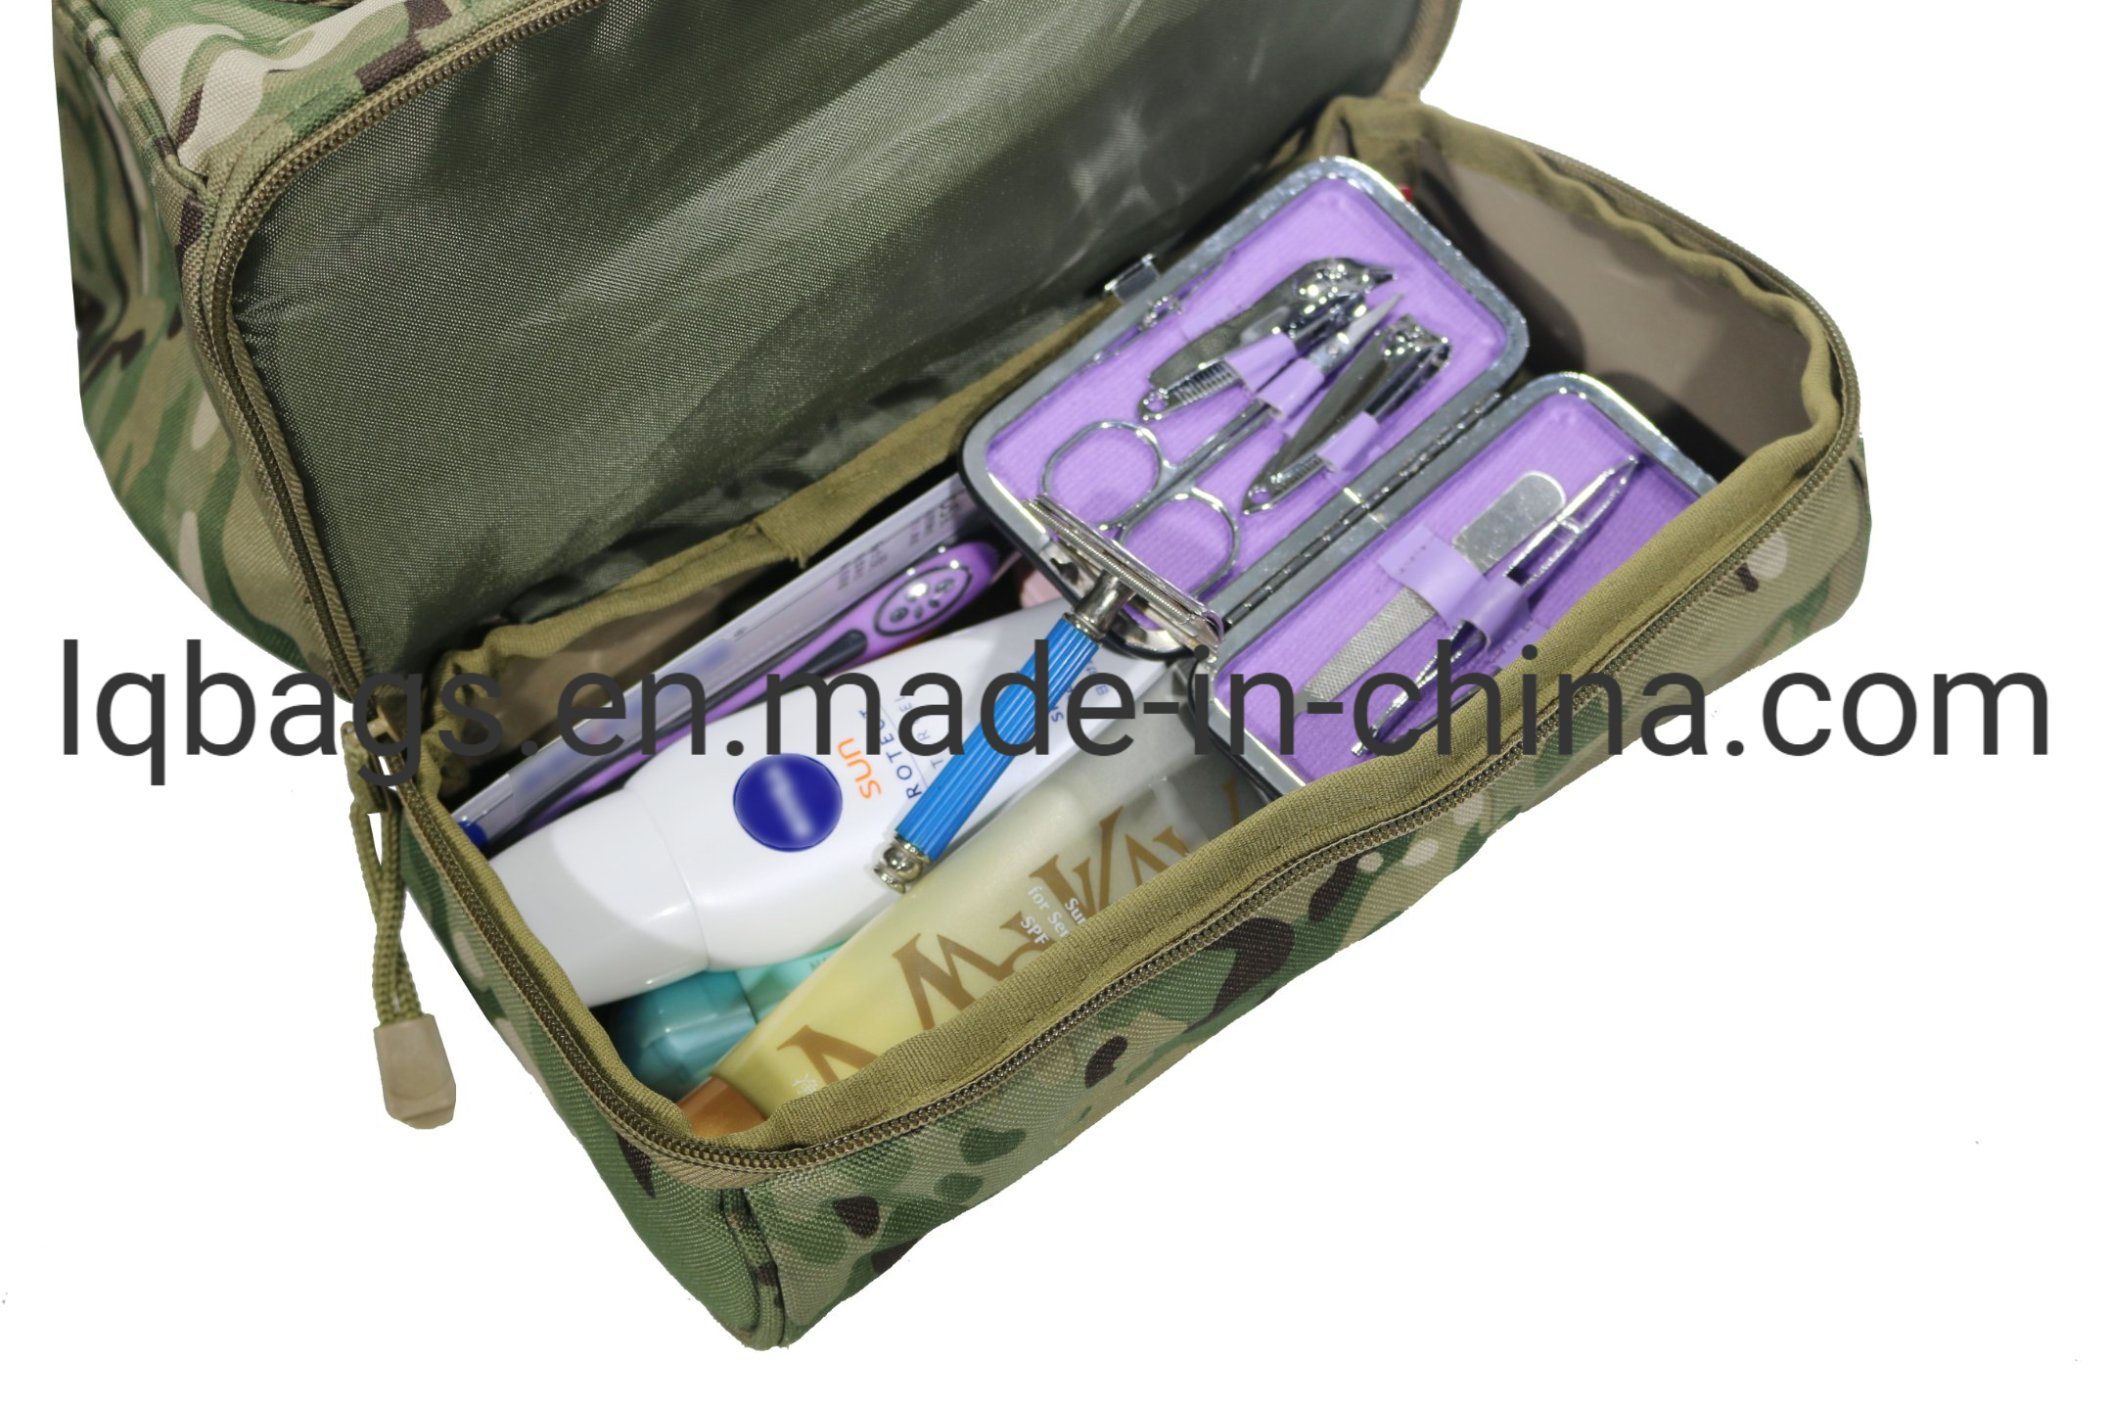 Tactical Wash Bag Organize Bag Pack for Outdoor Camping